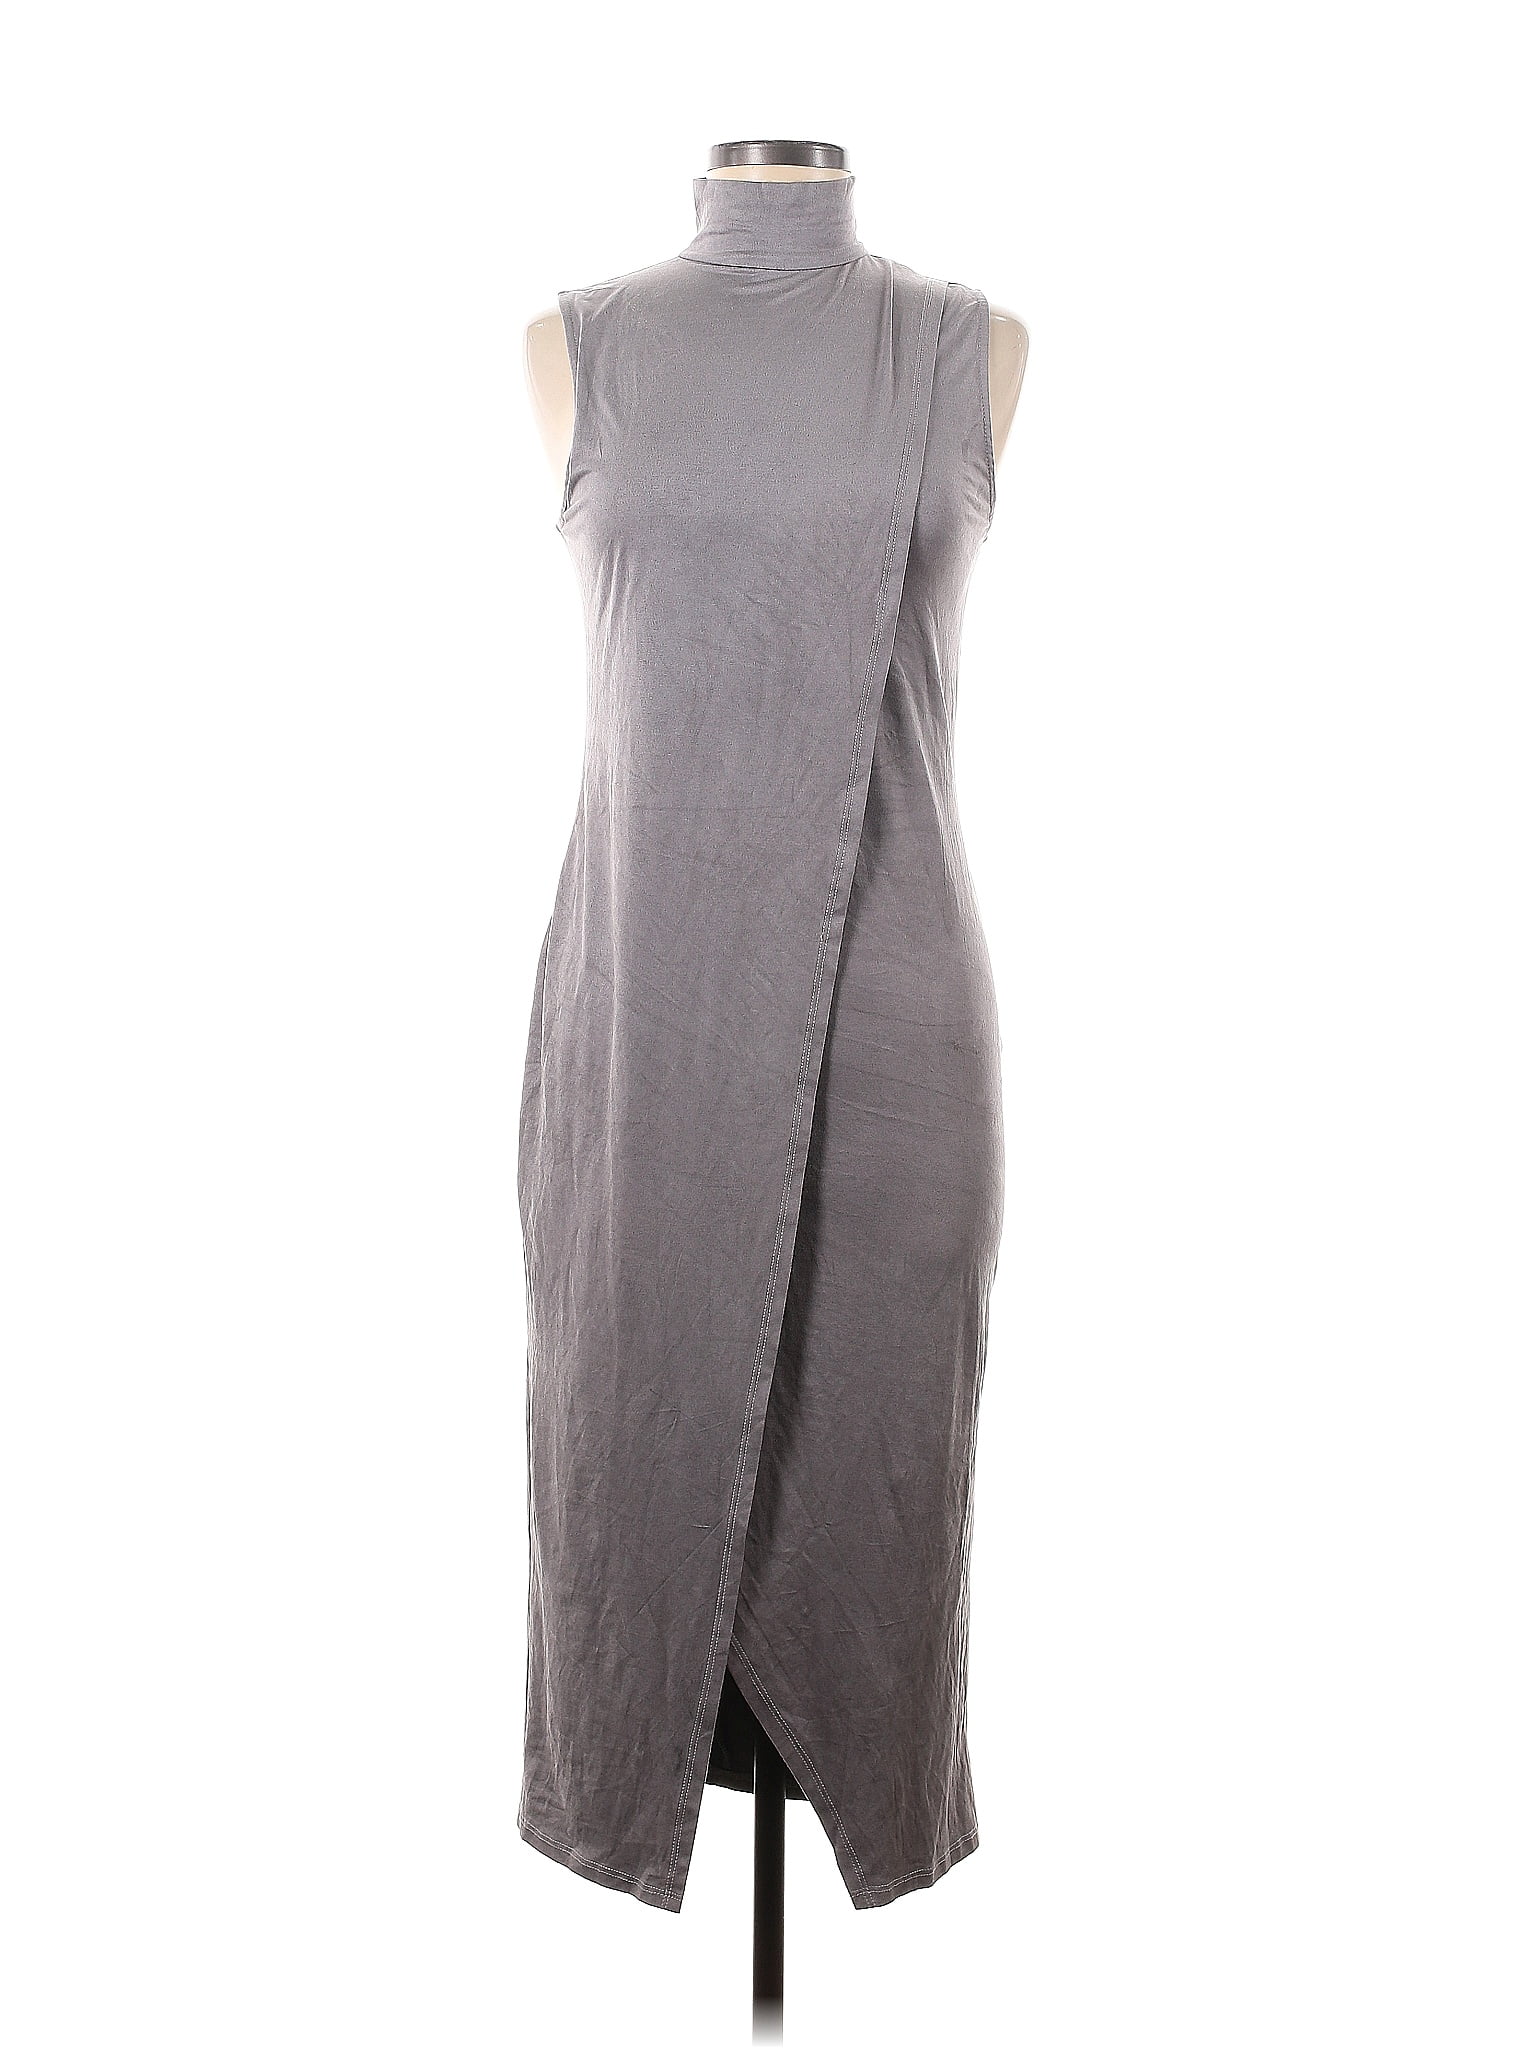 Six Crisp Days 100% Polyester Solid Gray Casual Dress Size M - 67% off ...